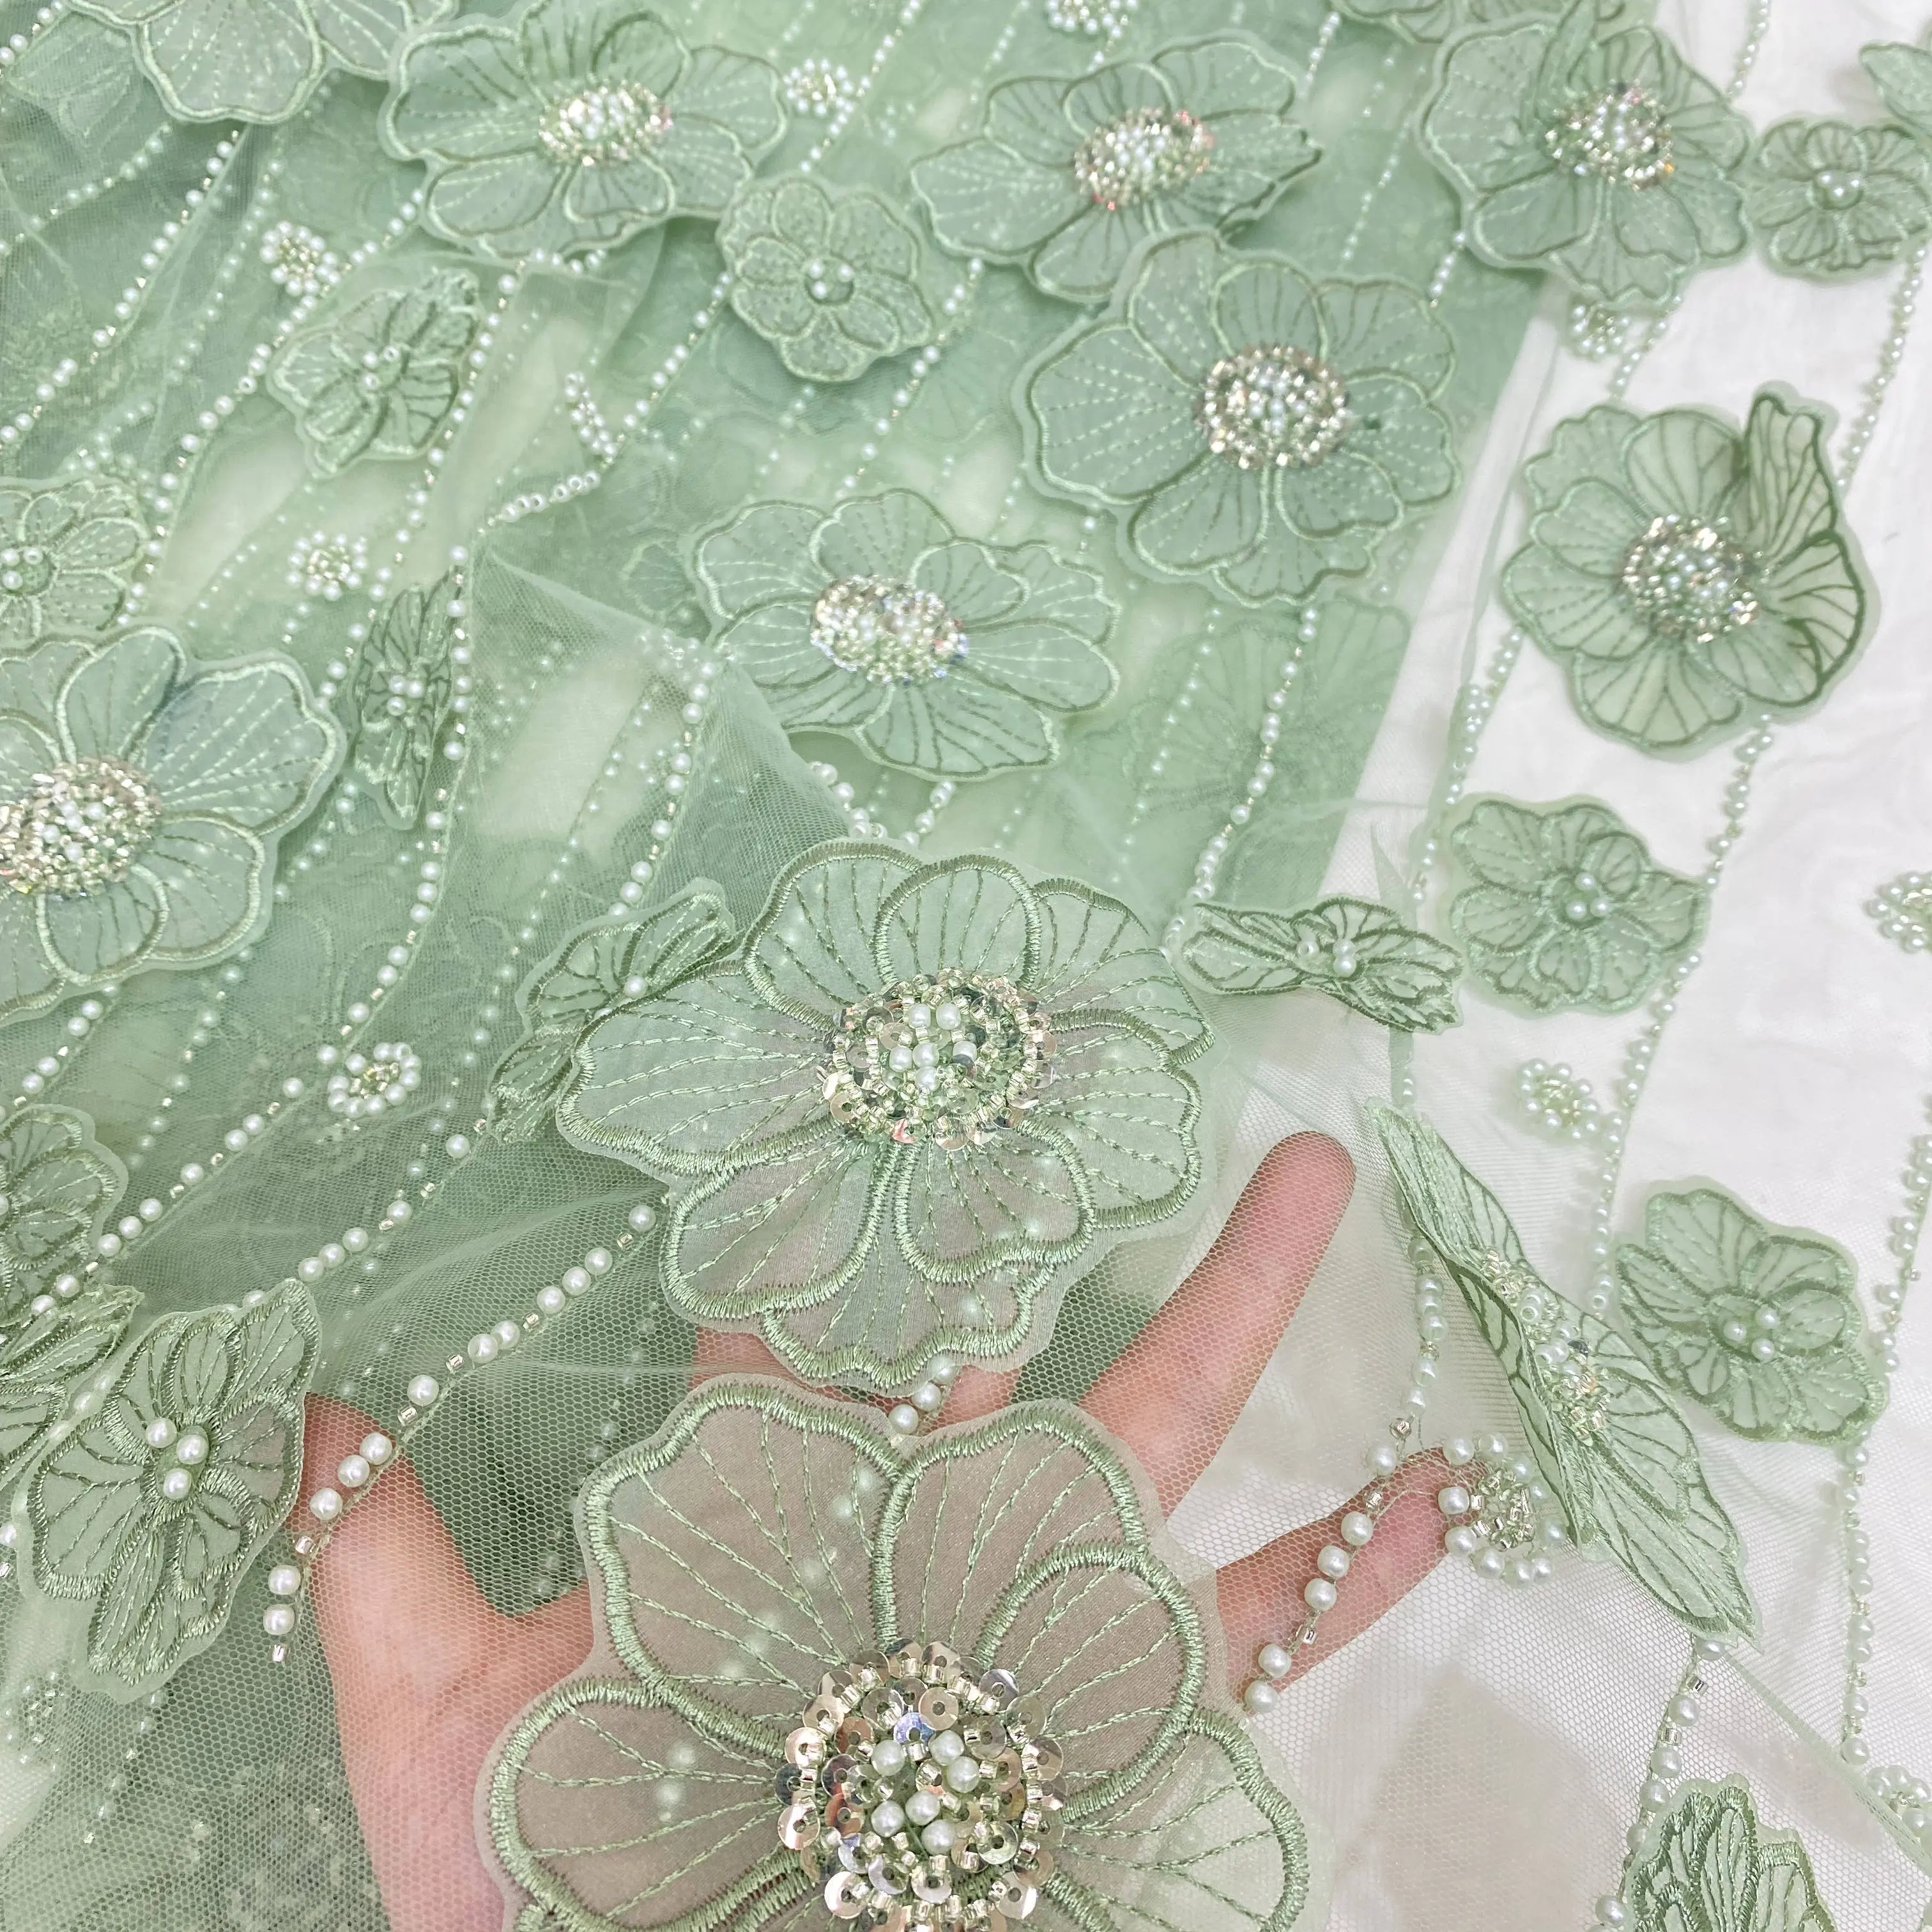 Newest dresses women elegant coiling green Heavy embroidery 3d flower pearls beaded applique french bridal lace fabric